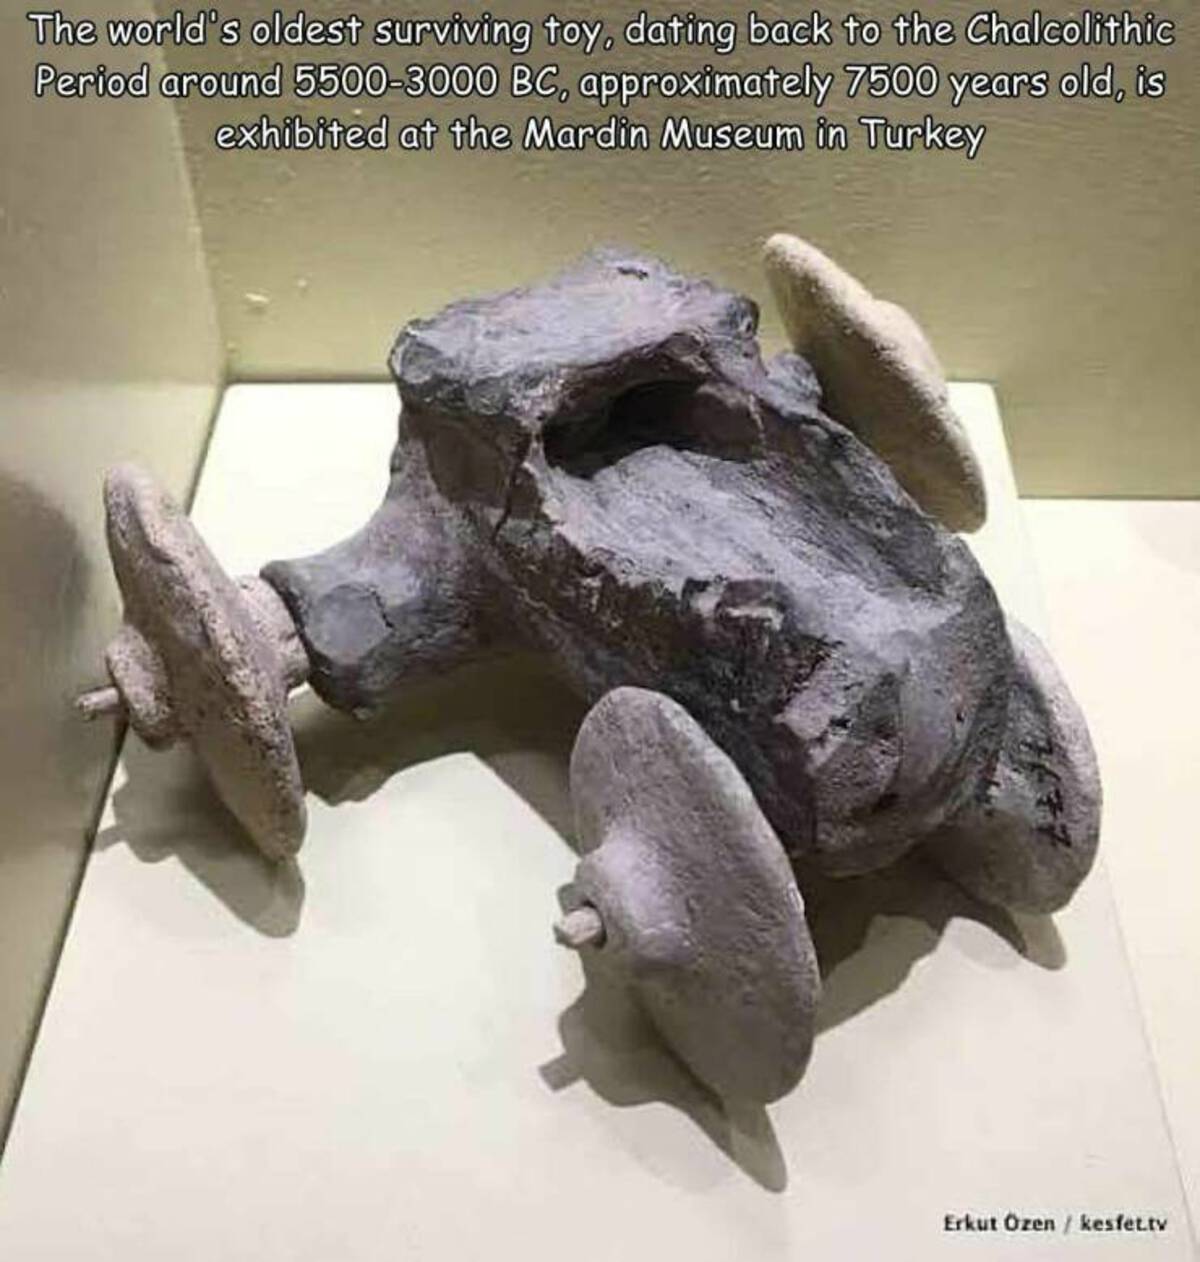 leatherback sea turtle - The world's oldest surviving toy, dating back to the Chalcolithic Period around 55003000 Bc, approximately 7500 years old, is exhibited at the Mardin Museum in Turkey Erkut zenkesfet.tv